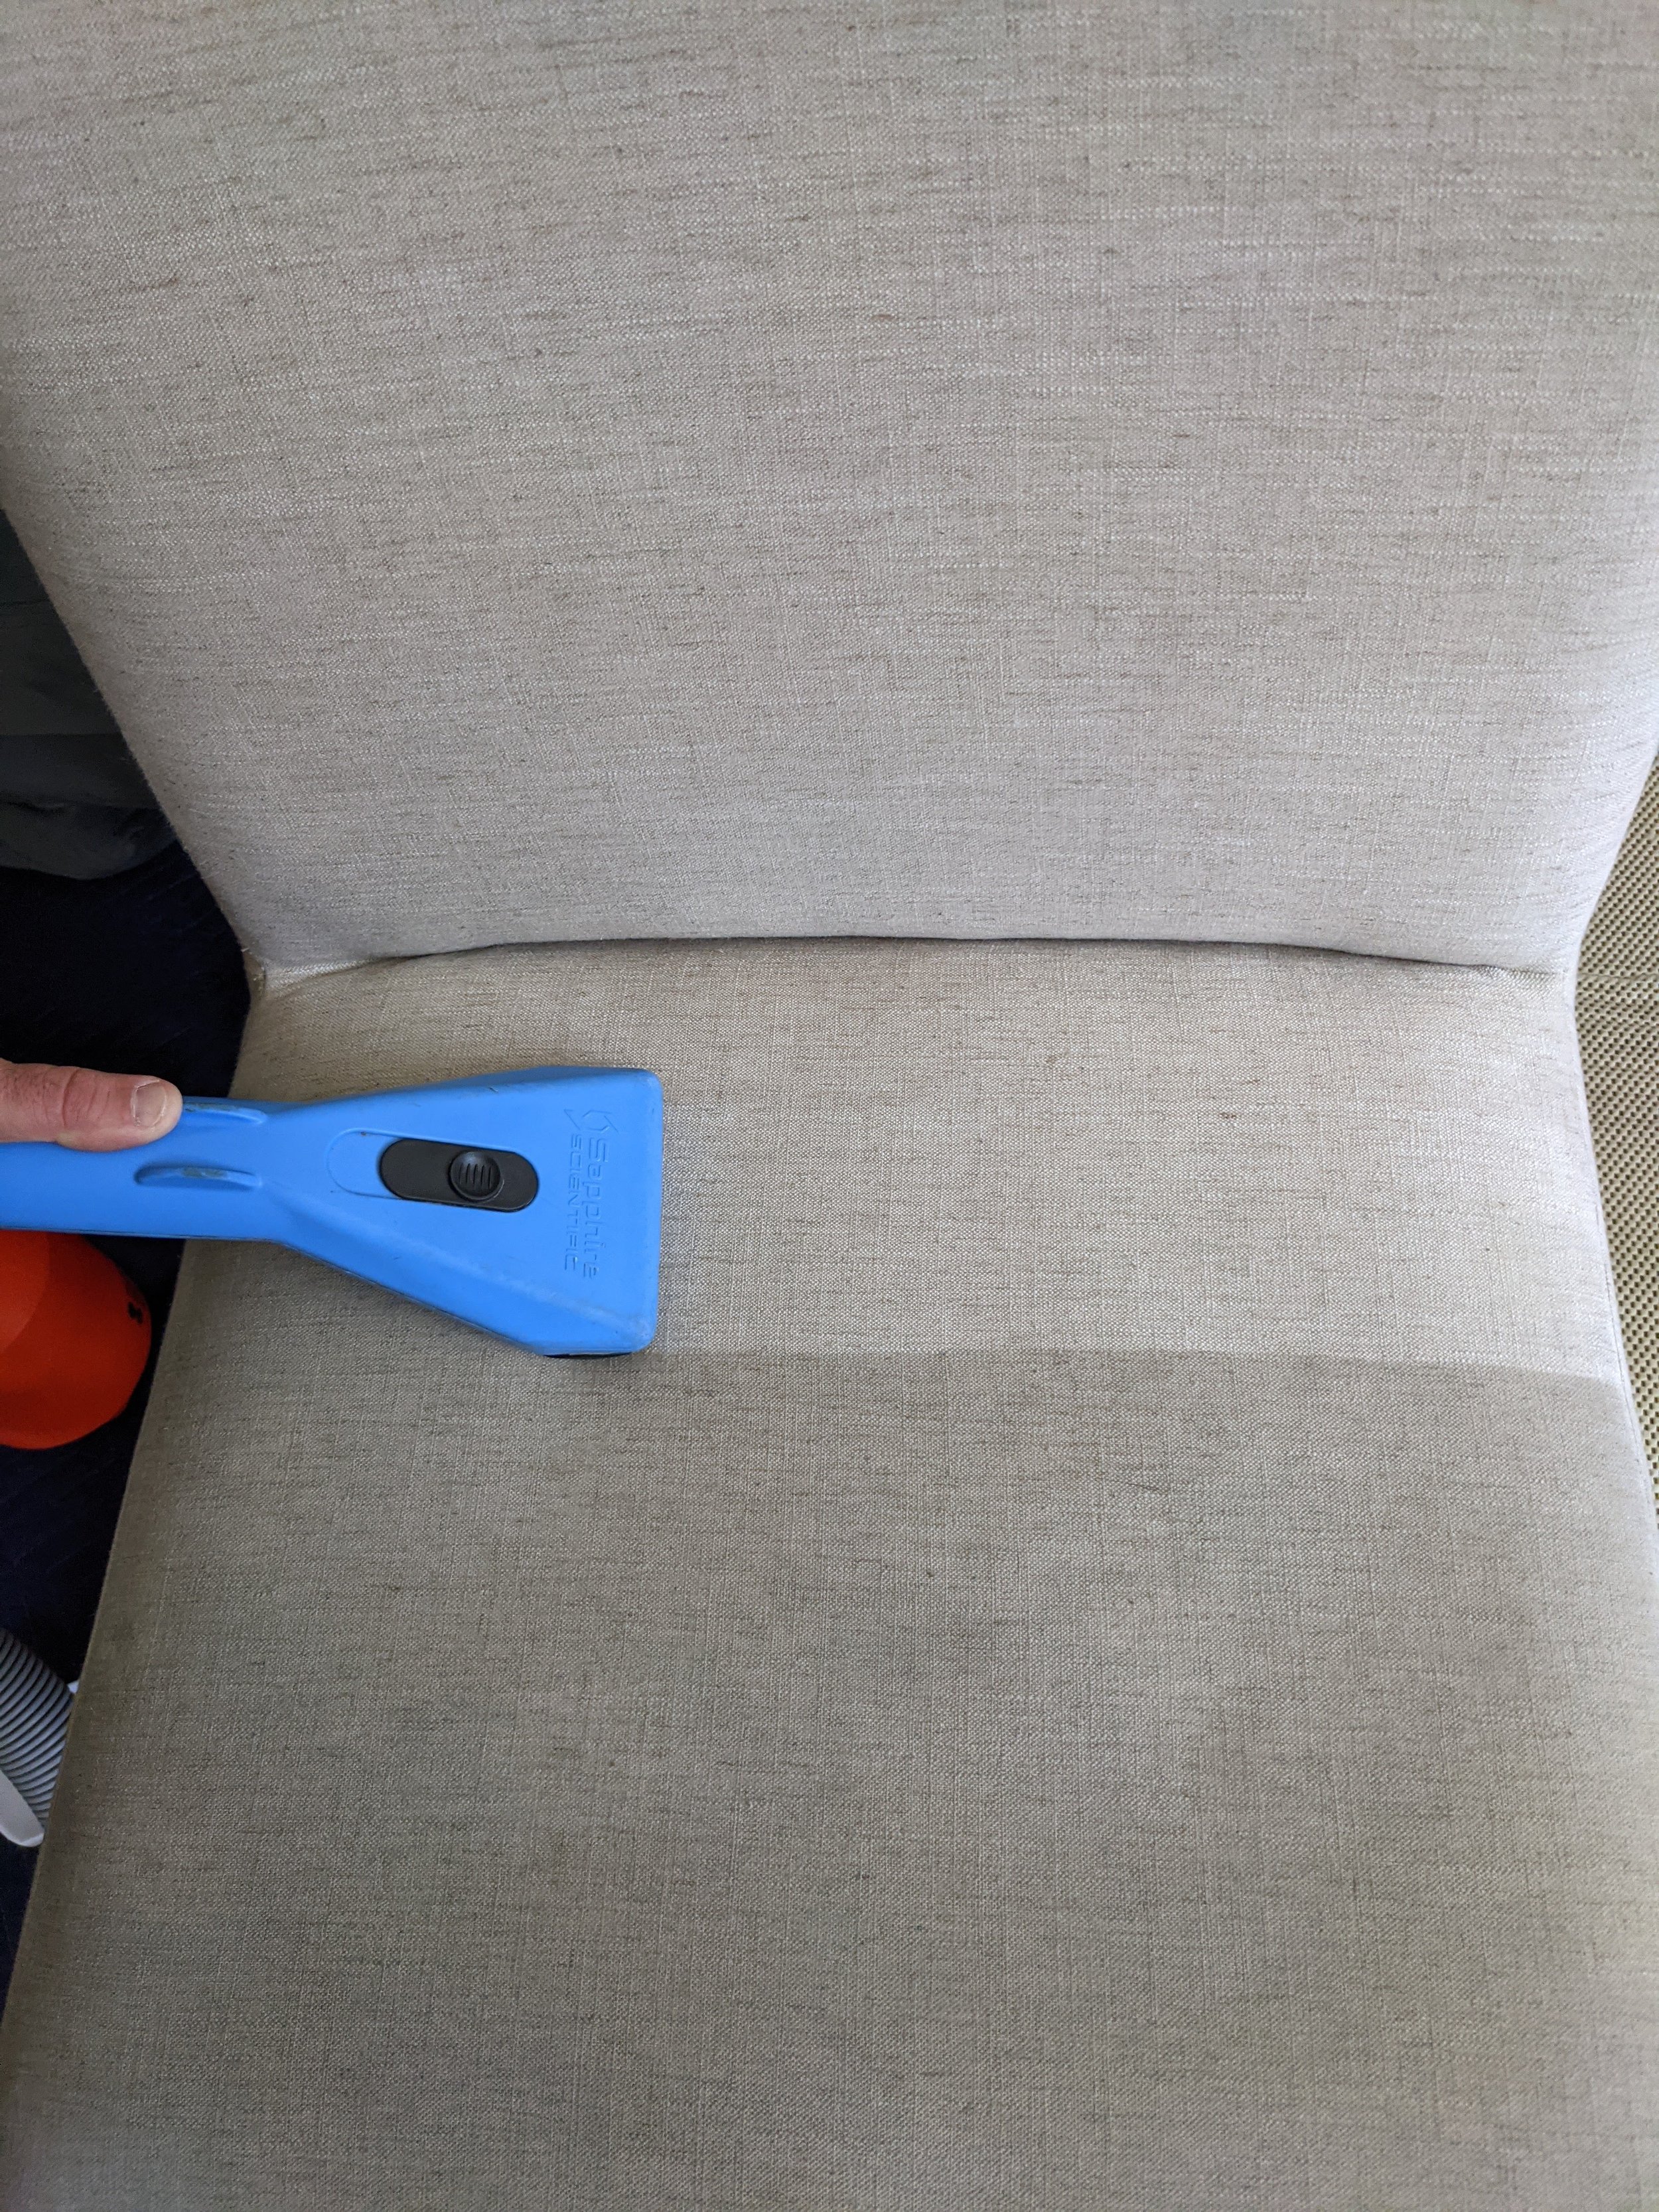 Upholstery cleaning Corralitos.jpg